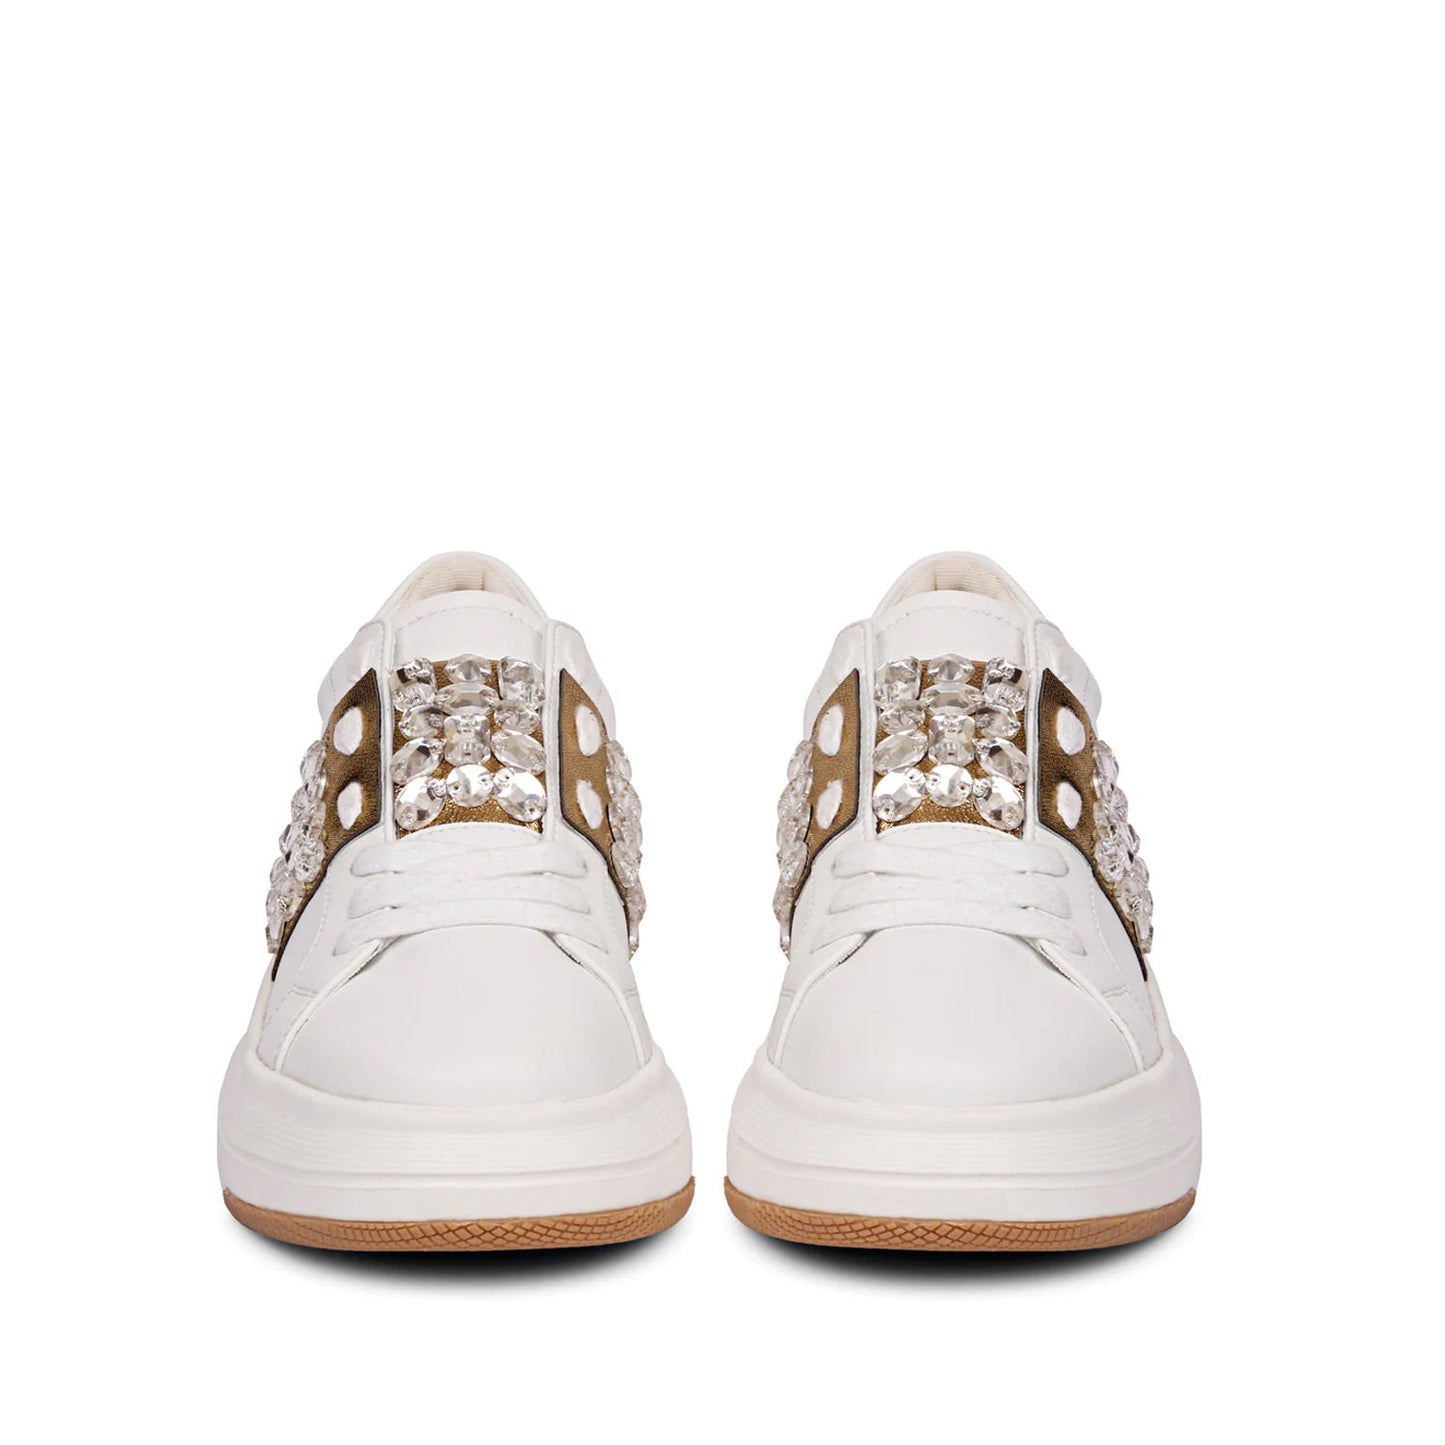 Whitesta Joanna Crystal Off White Leather Sneakers - Elegant off-white sneakers with crystal embellishments for a touch of glamour and timeless style.